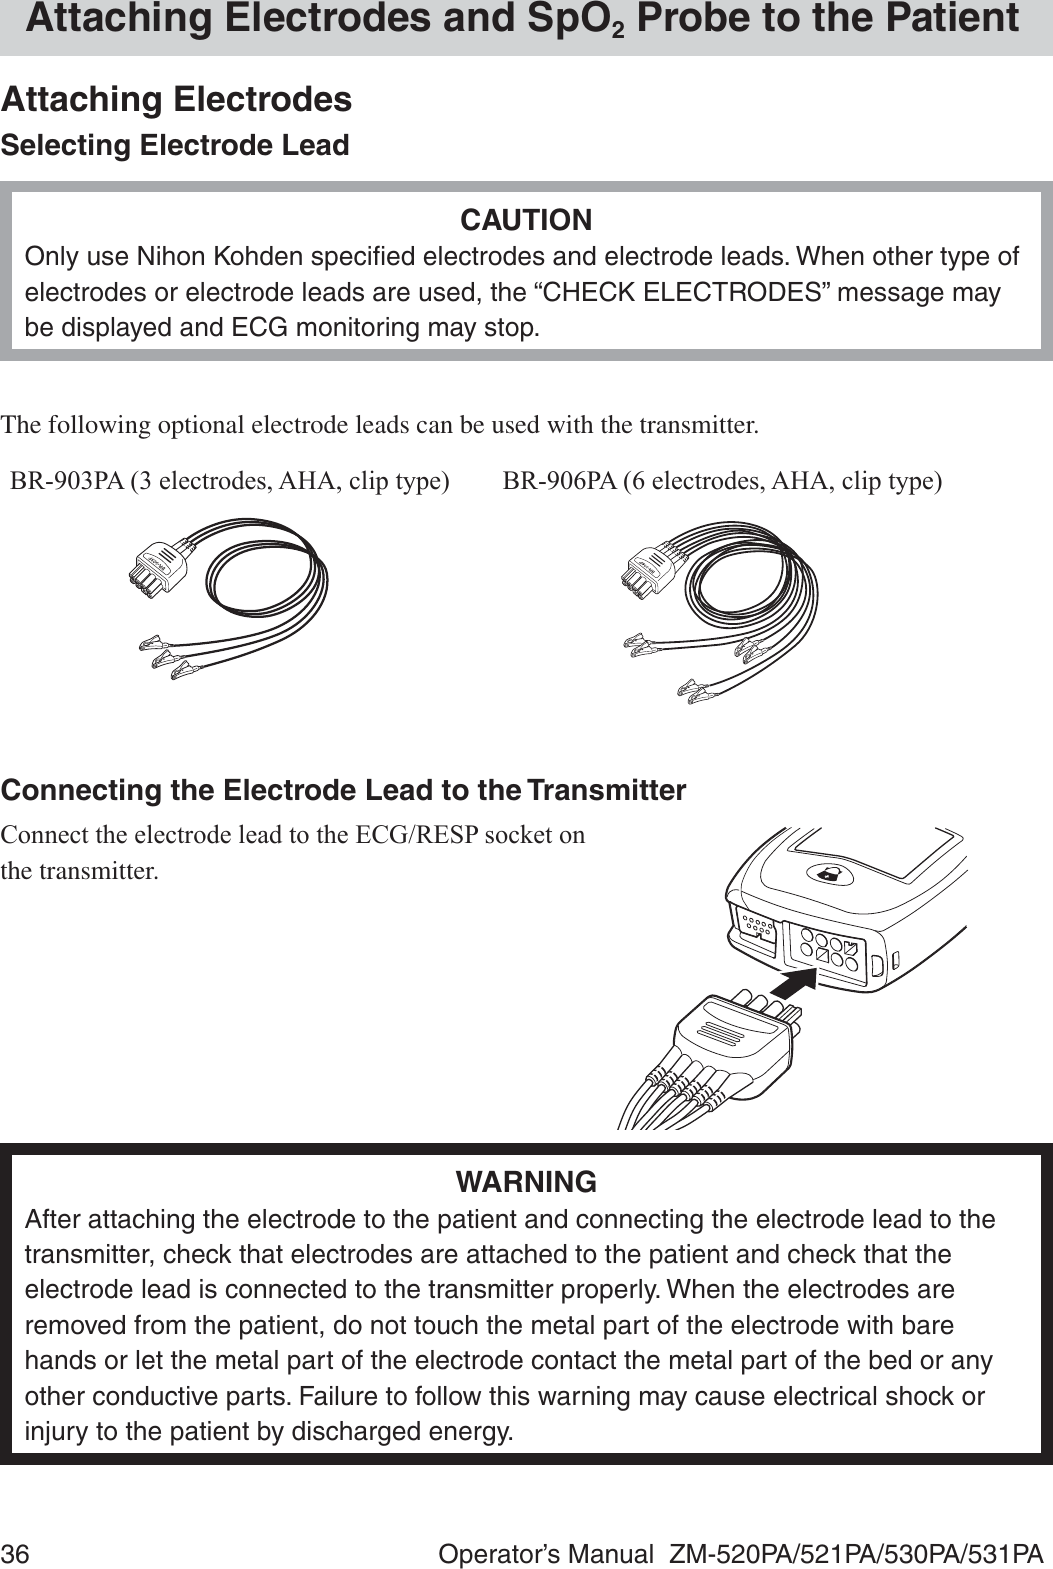 36  Operator’s Manual  ZM-520PA/521PA/530PA/531PAAttaching Electrodes and SpO2 Probe to the PatientAttaching ElectrodesSelecting Electrode LeadCAUTIONOnly use Nihon Kohden speciﬁed electrodes and electrode leads. When other type of electrodes or electrode leads are used, the “CHECK ELECTRODES” message may be displayed and ECG monitoring may stop.The following optional electrode leads can be used with the transmitter.%53$HOHFWURGHV$+$FOLSW\SH %53$HOHFWURGHV$+$FOLSW\SHConnecting the Electrode Lead to the Transmitter&amp;RQQHFWWKHHOHFWURGHOHDGWRWKH(&amp;*5(63VRFNHWRQthe transmitter.WARNINGAfter attaching the electrode to the patient and connecting the electrode lead to the transmitter, check that electrodes are attached to the patient and check that the electrode lead is connected to the transmitter properly. When the electrodes are removed from the patient, do not touch the metal part of the electrode with bare hands or let the metal part of the electrode contact the metal part of the bed or any other conductive parts. Failure to follow this warning may cause electrical shock or injury to the patient by discharged energy.